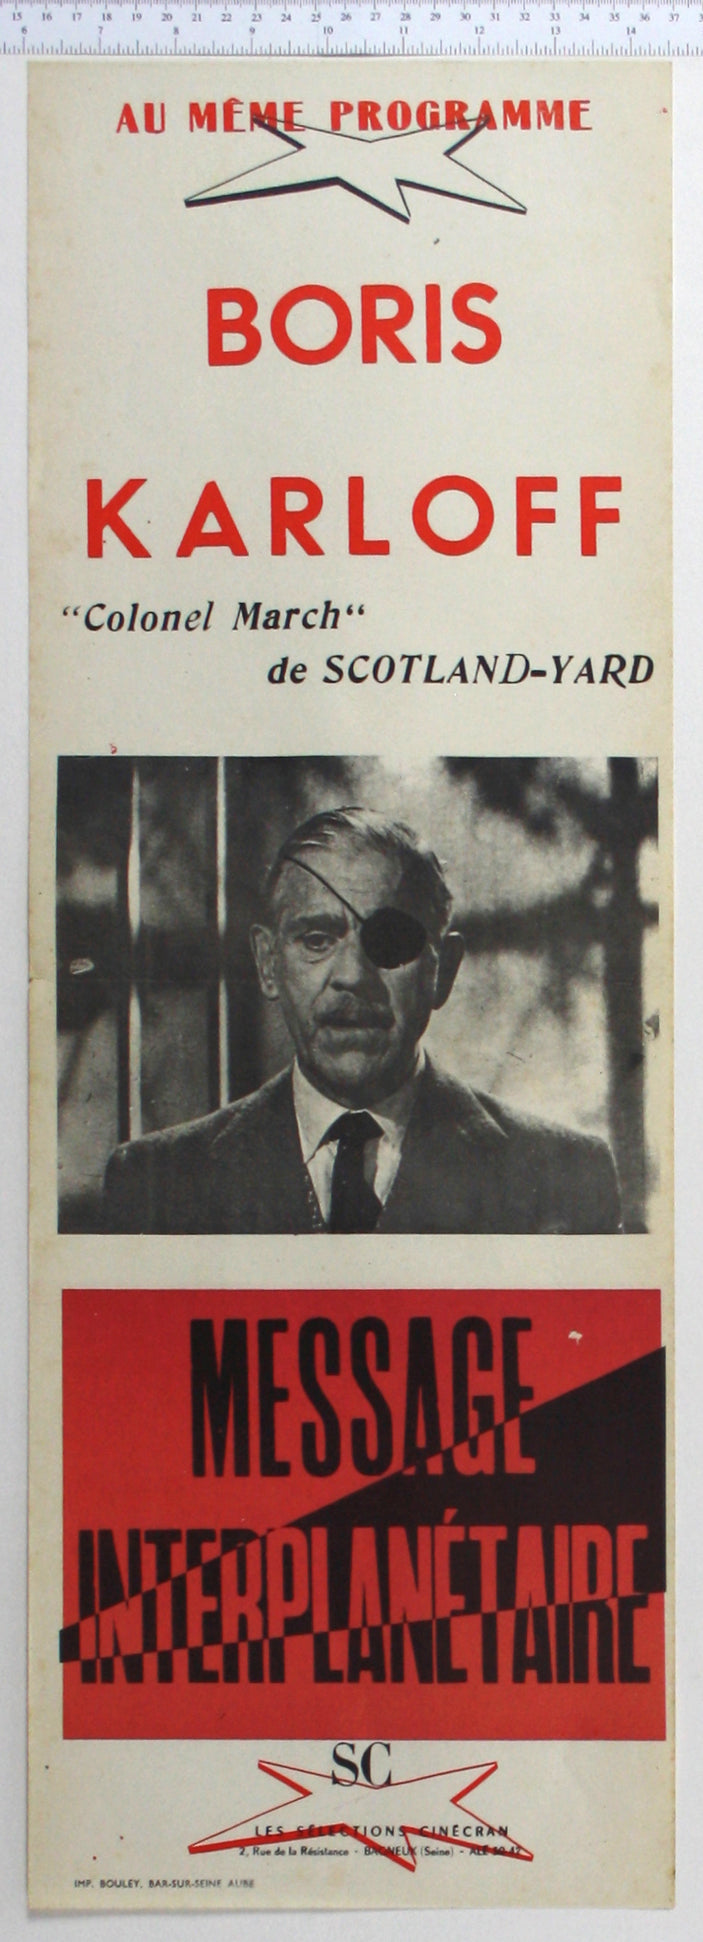 Narrow pKarloff's name prominent in red, Colonel March sub-title below, a black and white photo of the Colonel with eyepatch.